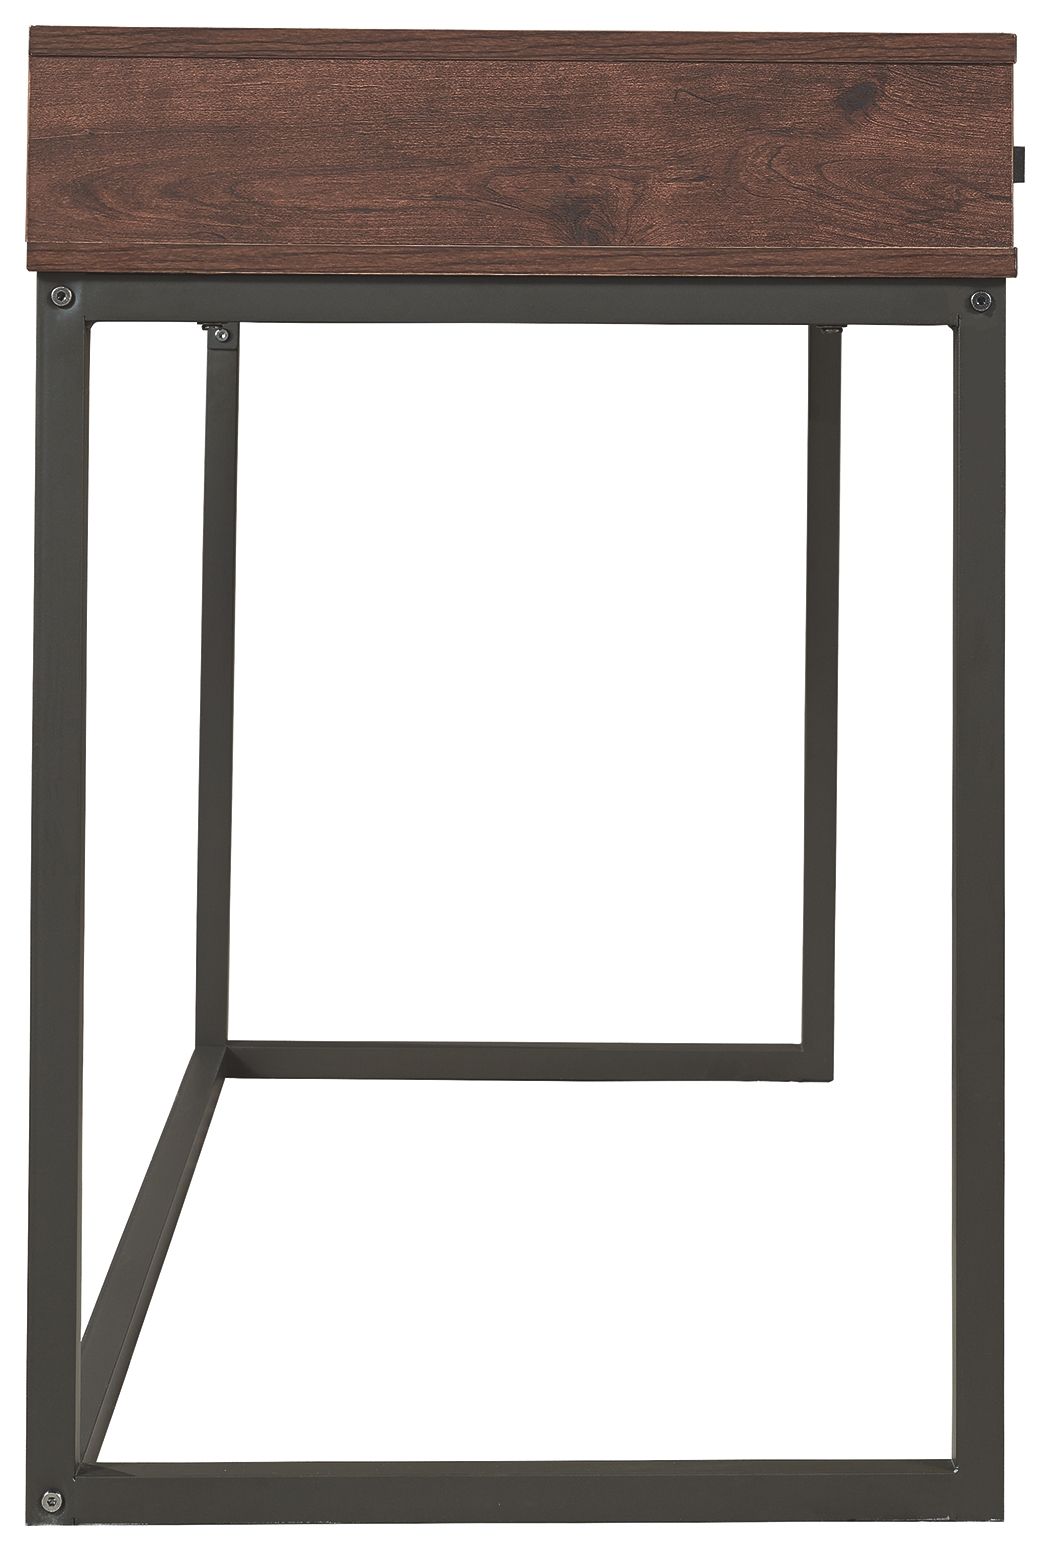 Horatio - Warm Brown / Gunmetal - Home Office Small Desk - Tony's Home Furnishings